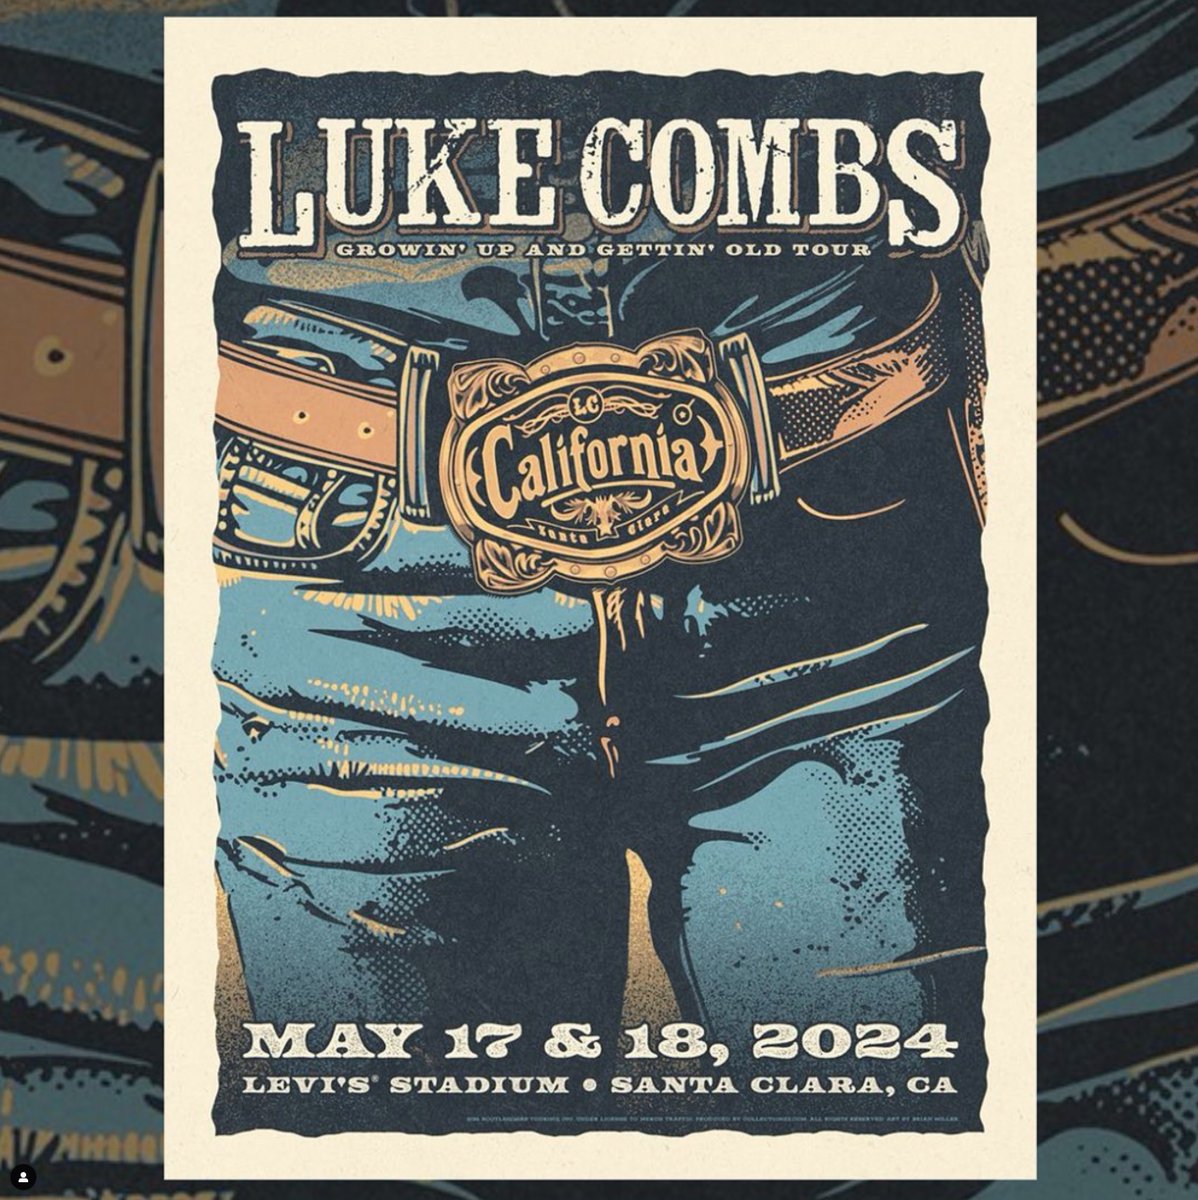 In 2023 a pair of used Levi’s jeans from 1873 sold for $100,000! The @lukecombsconcert poster from  @levisstadium won’t cost you quite as much 😂👖

Released by @collectionzz
Art by Brian Miller

#lukecombs #gigposter #concertposter #countrymusic #santaclara #california #levis